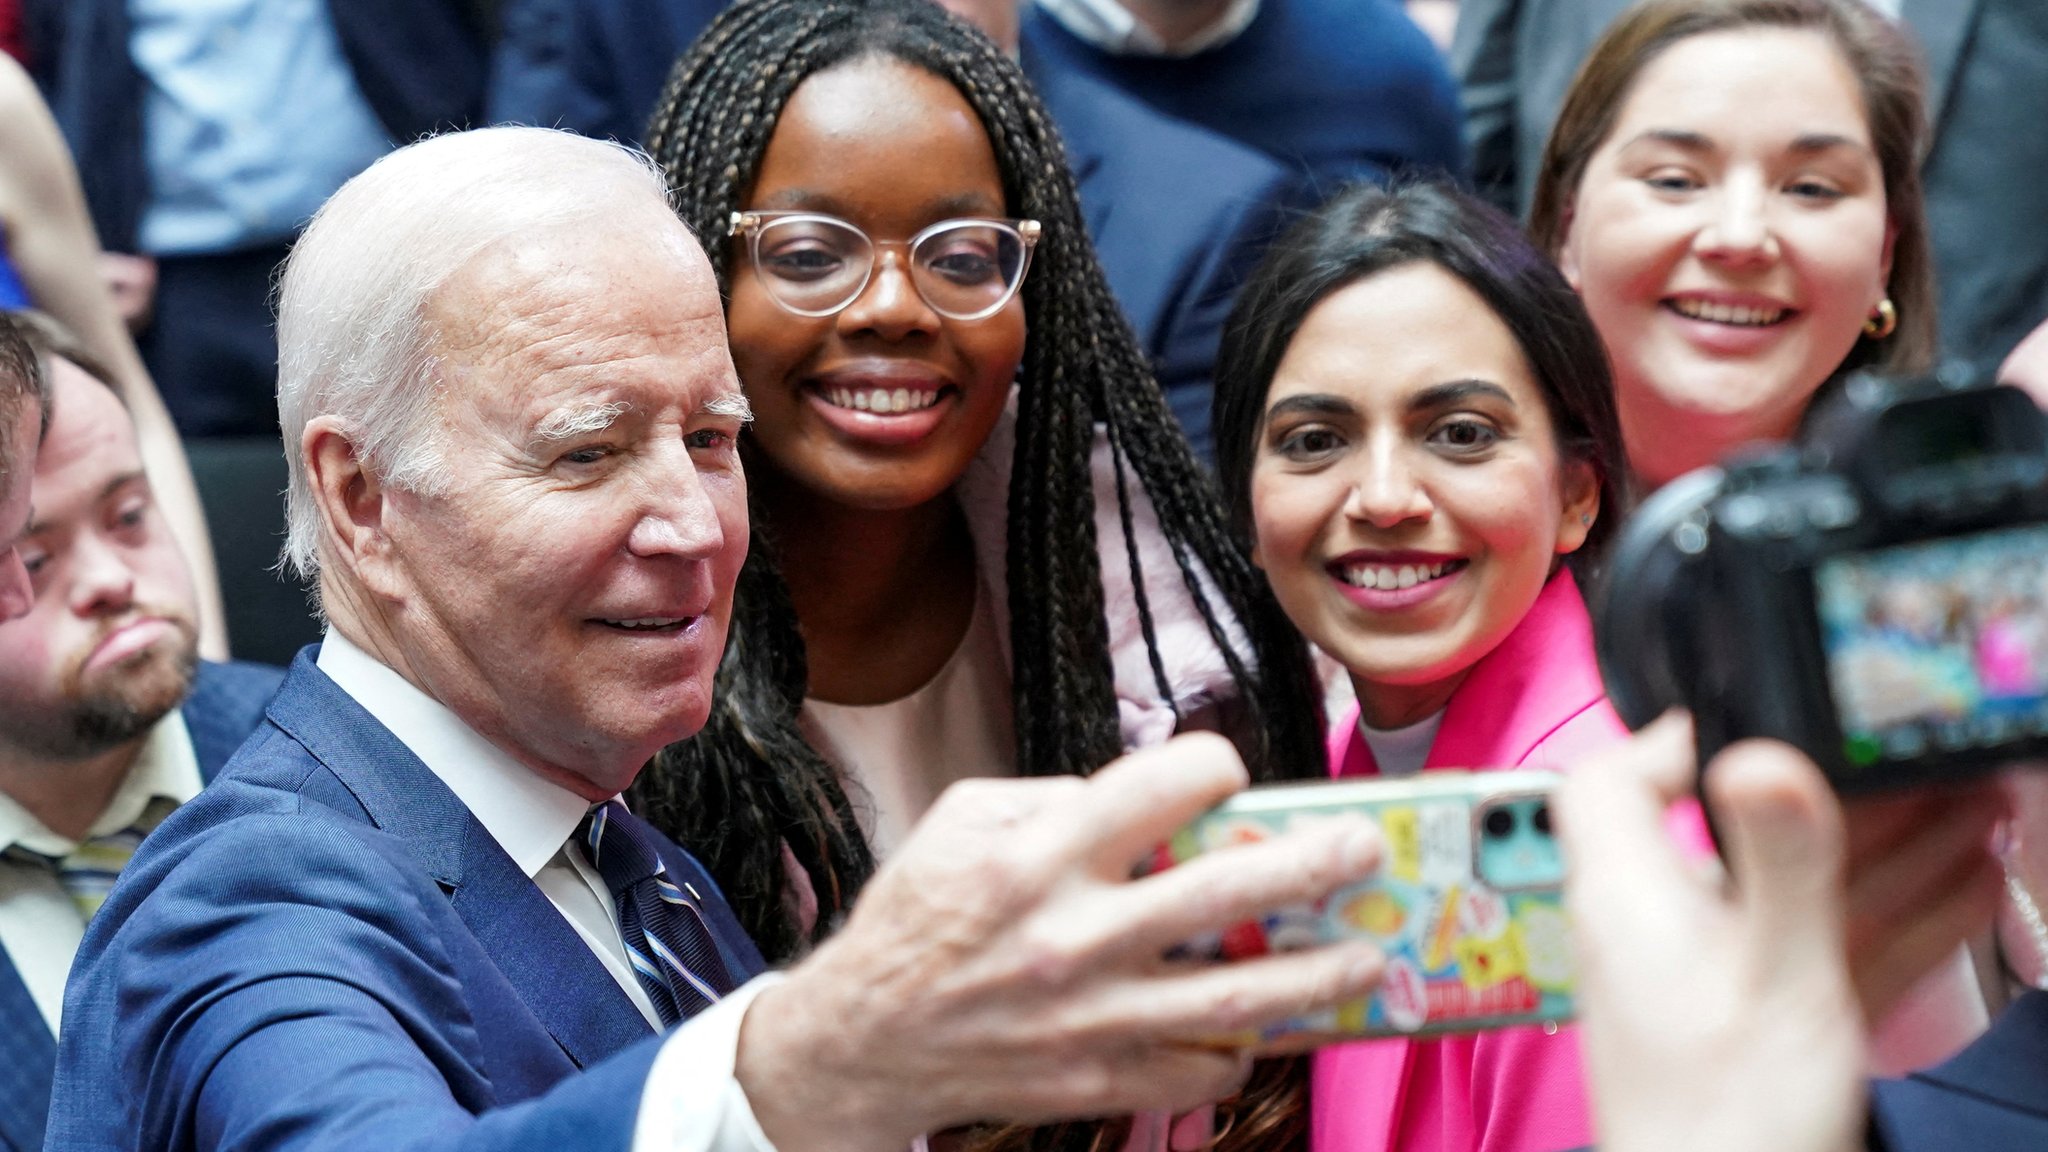 Biden hails young people of NI on his Belfast visit